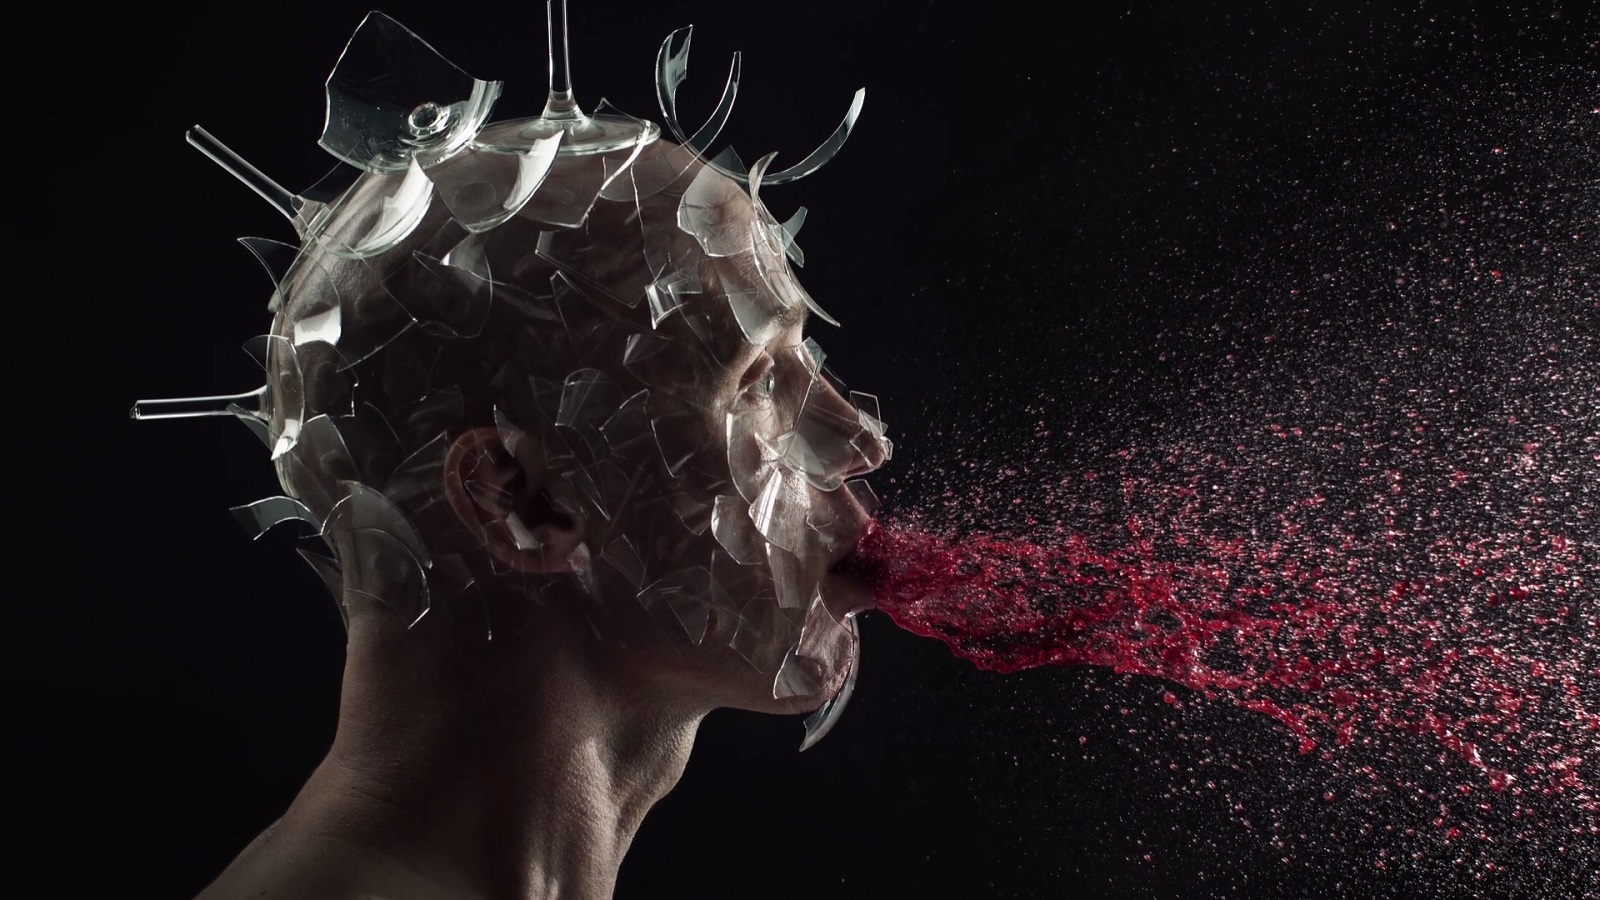 Passionate Chef and Photographer Present Food in a New Stunning Way